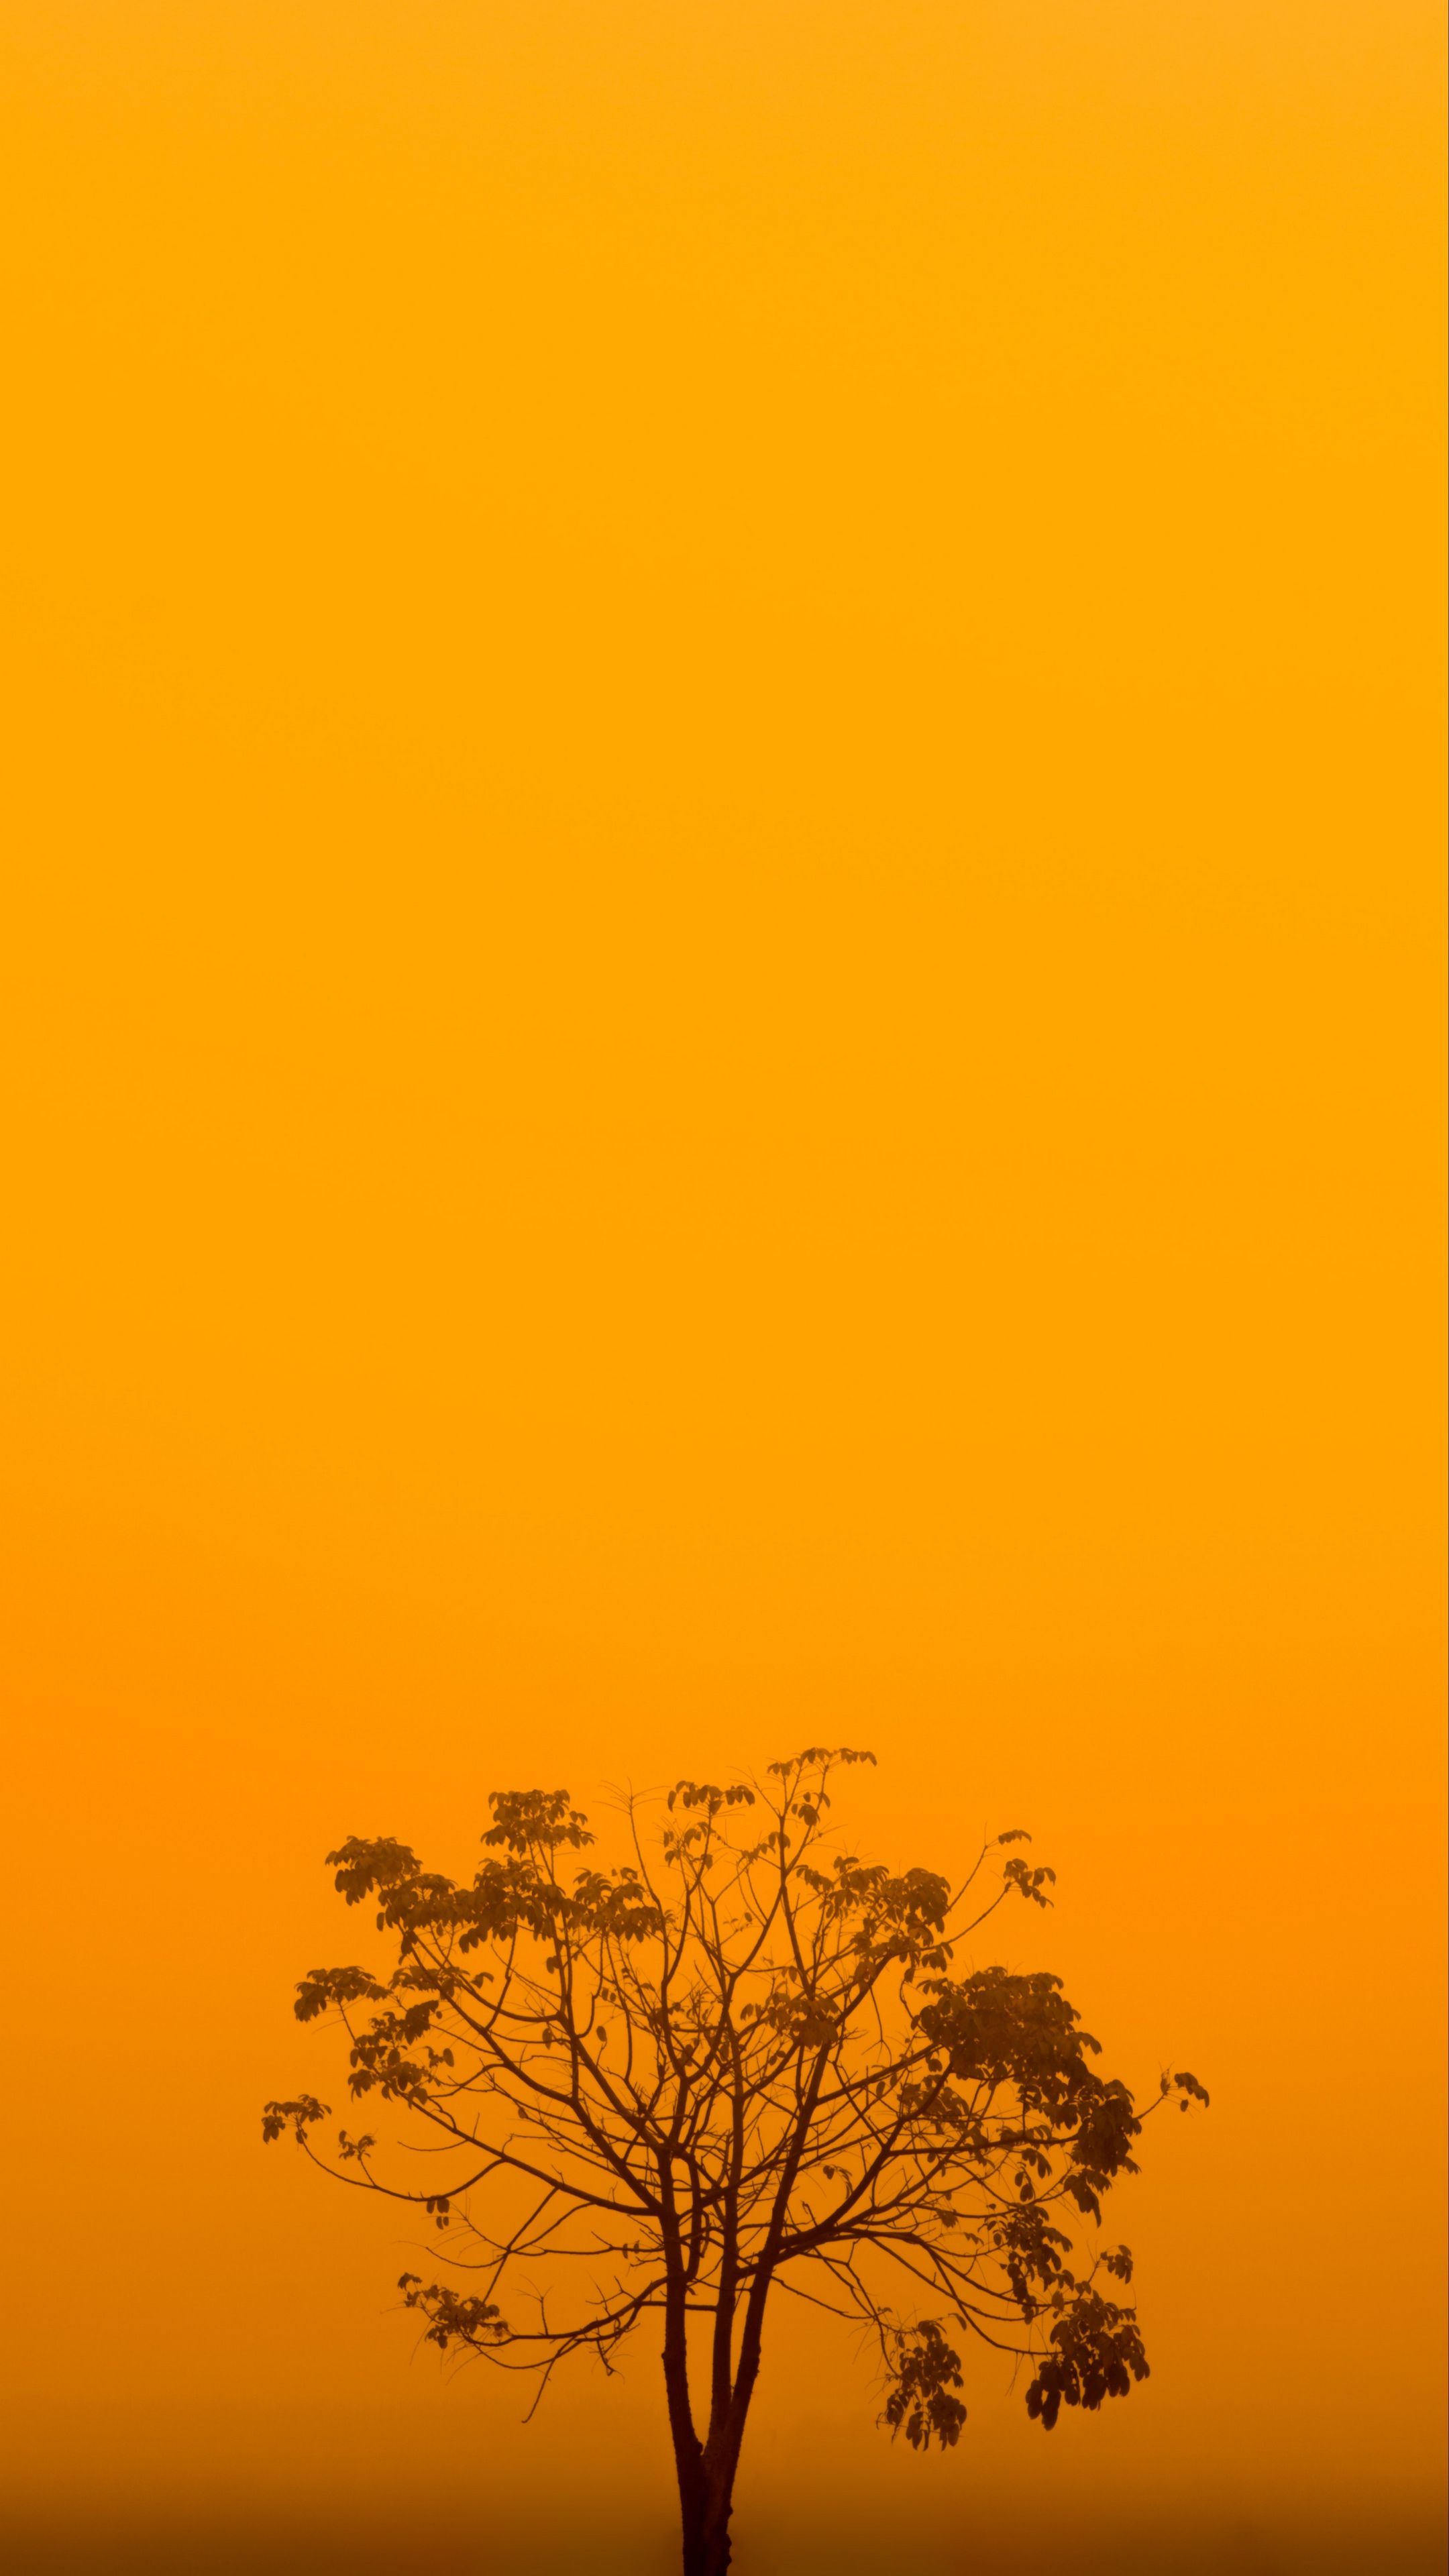 A lone tree in the middle of an orange sky - Yellow